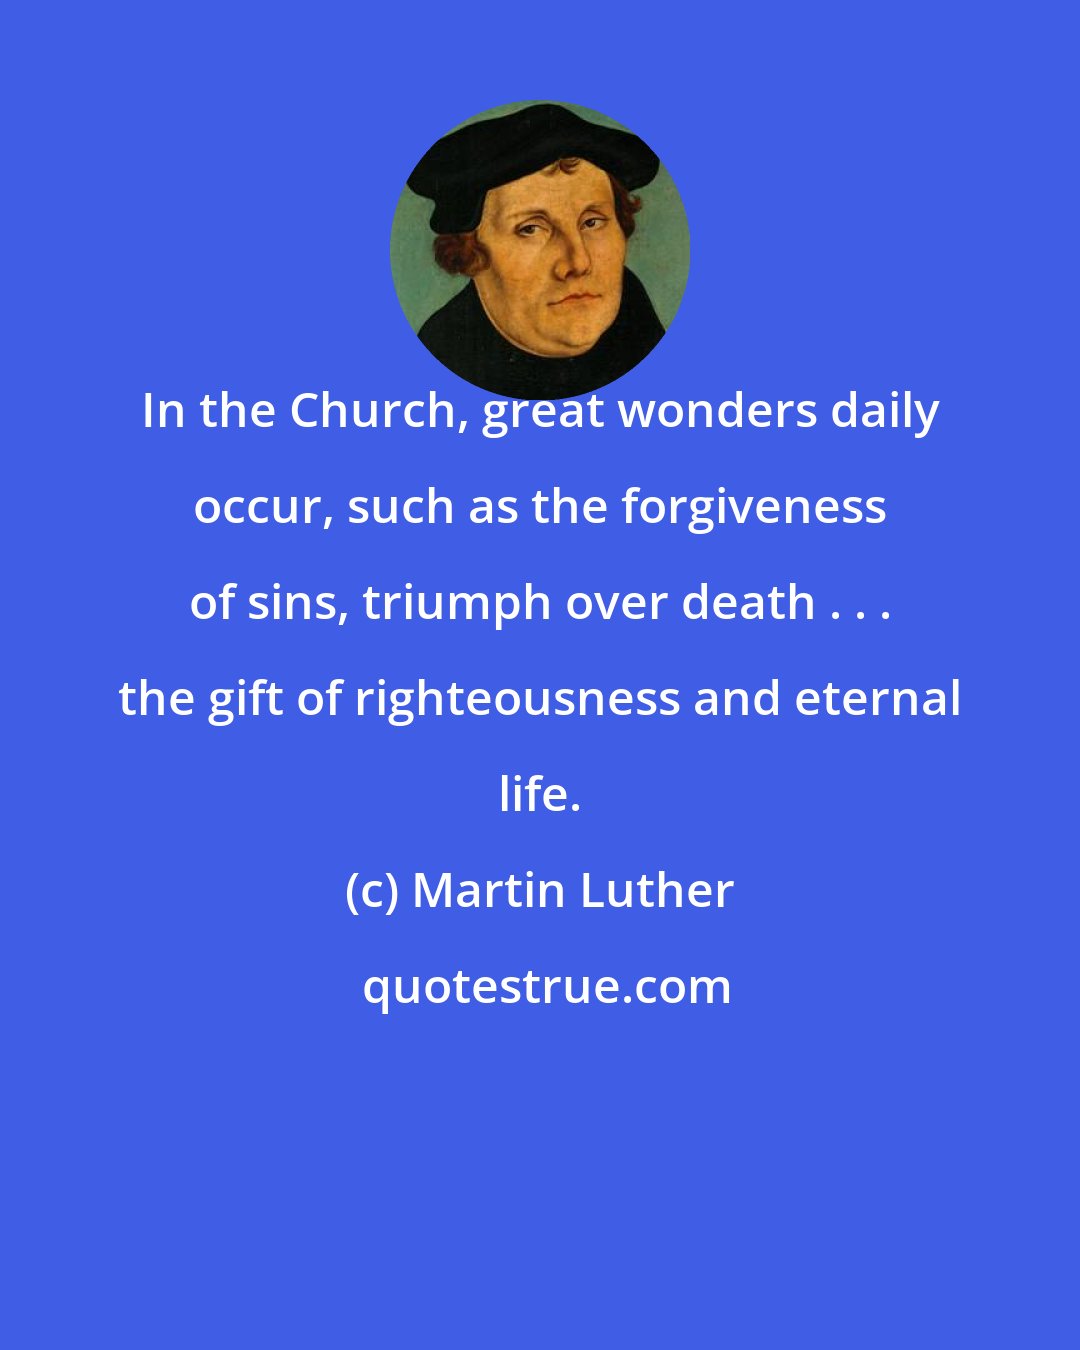 Martin Luther: In the Church, great wonders daily occur, such as the forgiveness of sins, triumph over death . . . the gift of righteousness and eternal life.